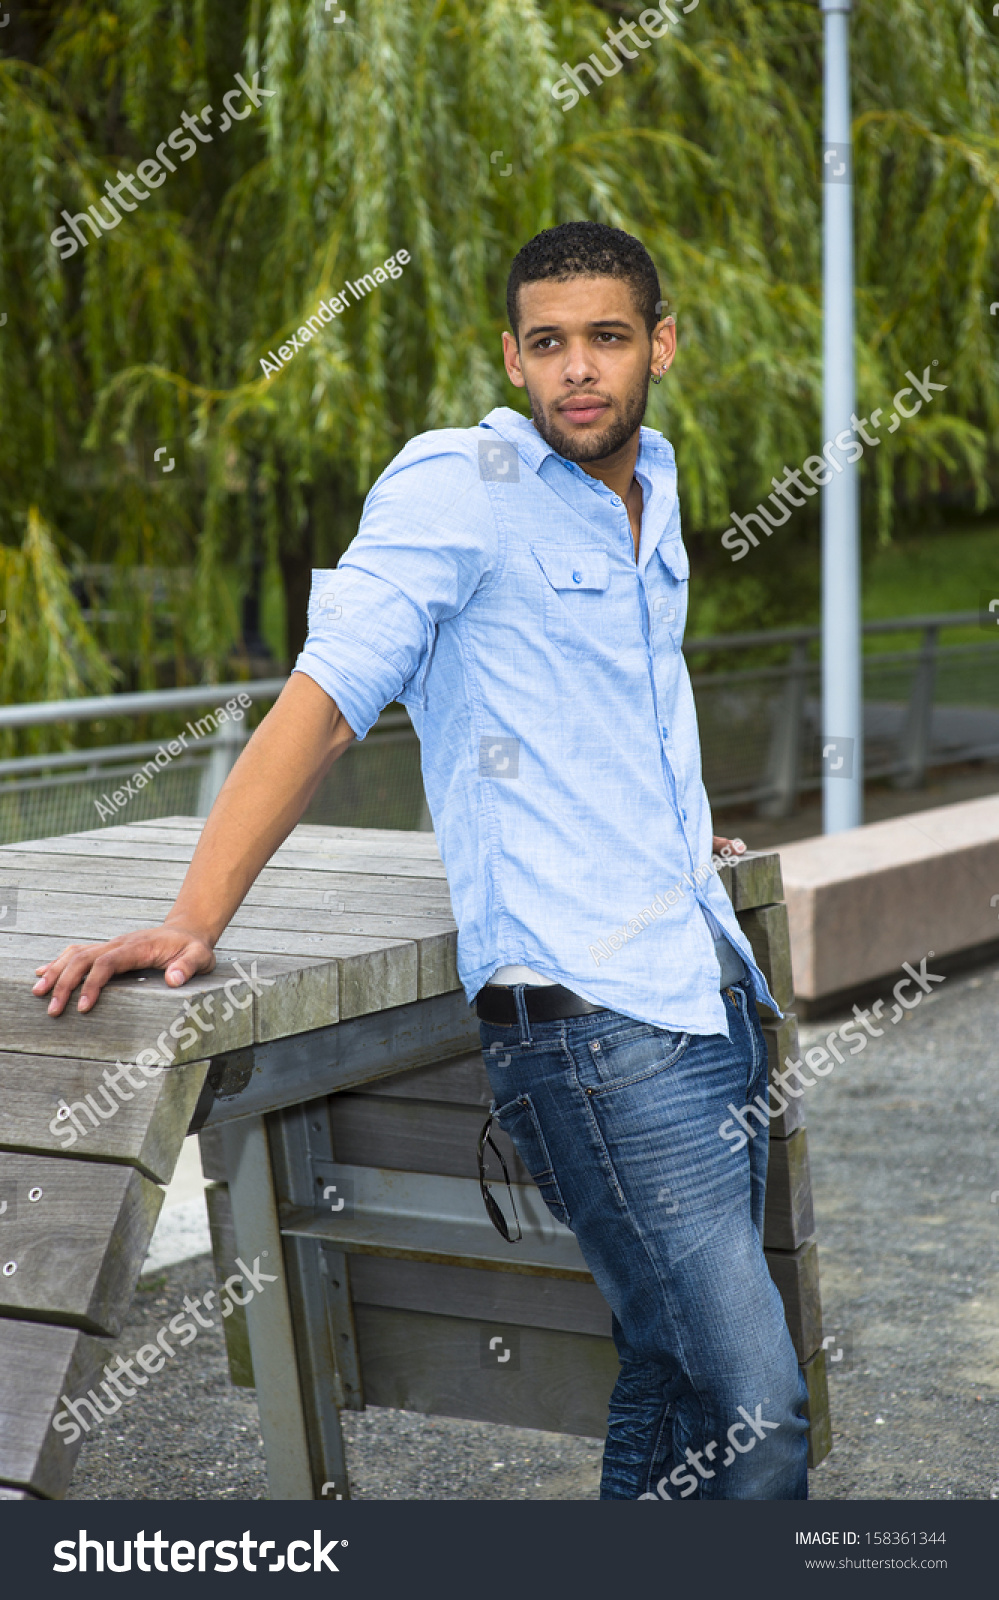 light blue shirt with blue jeans